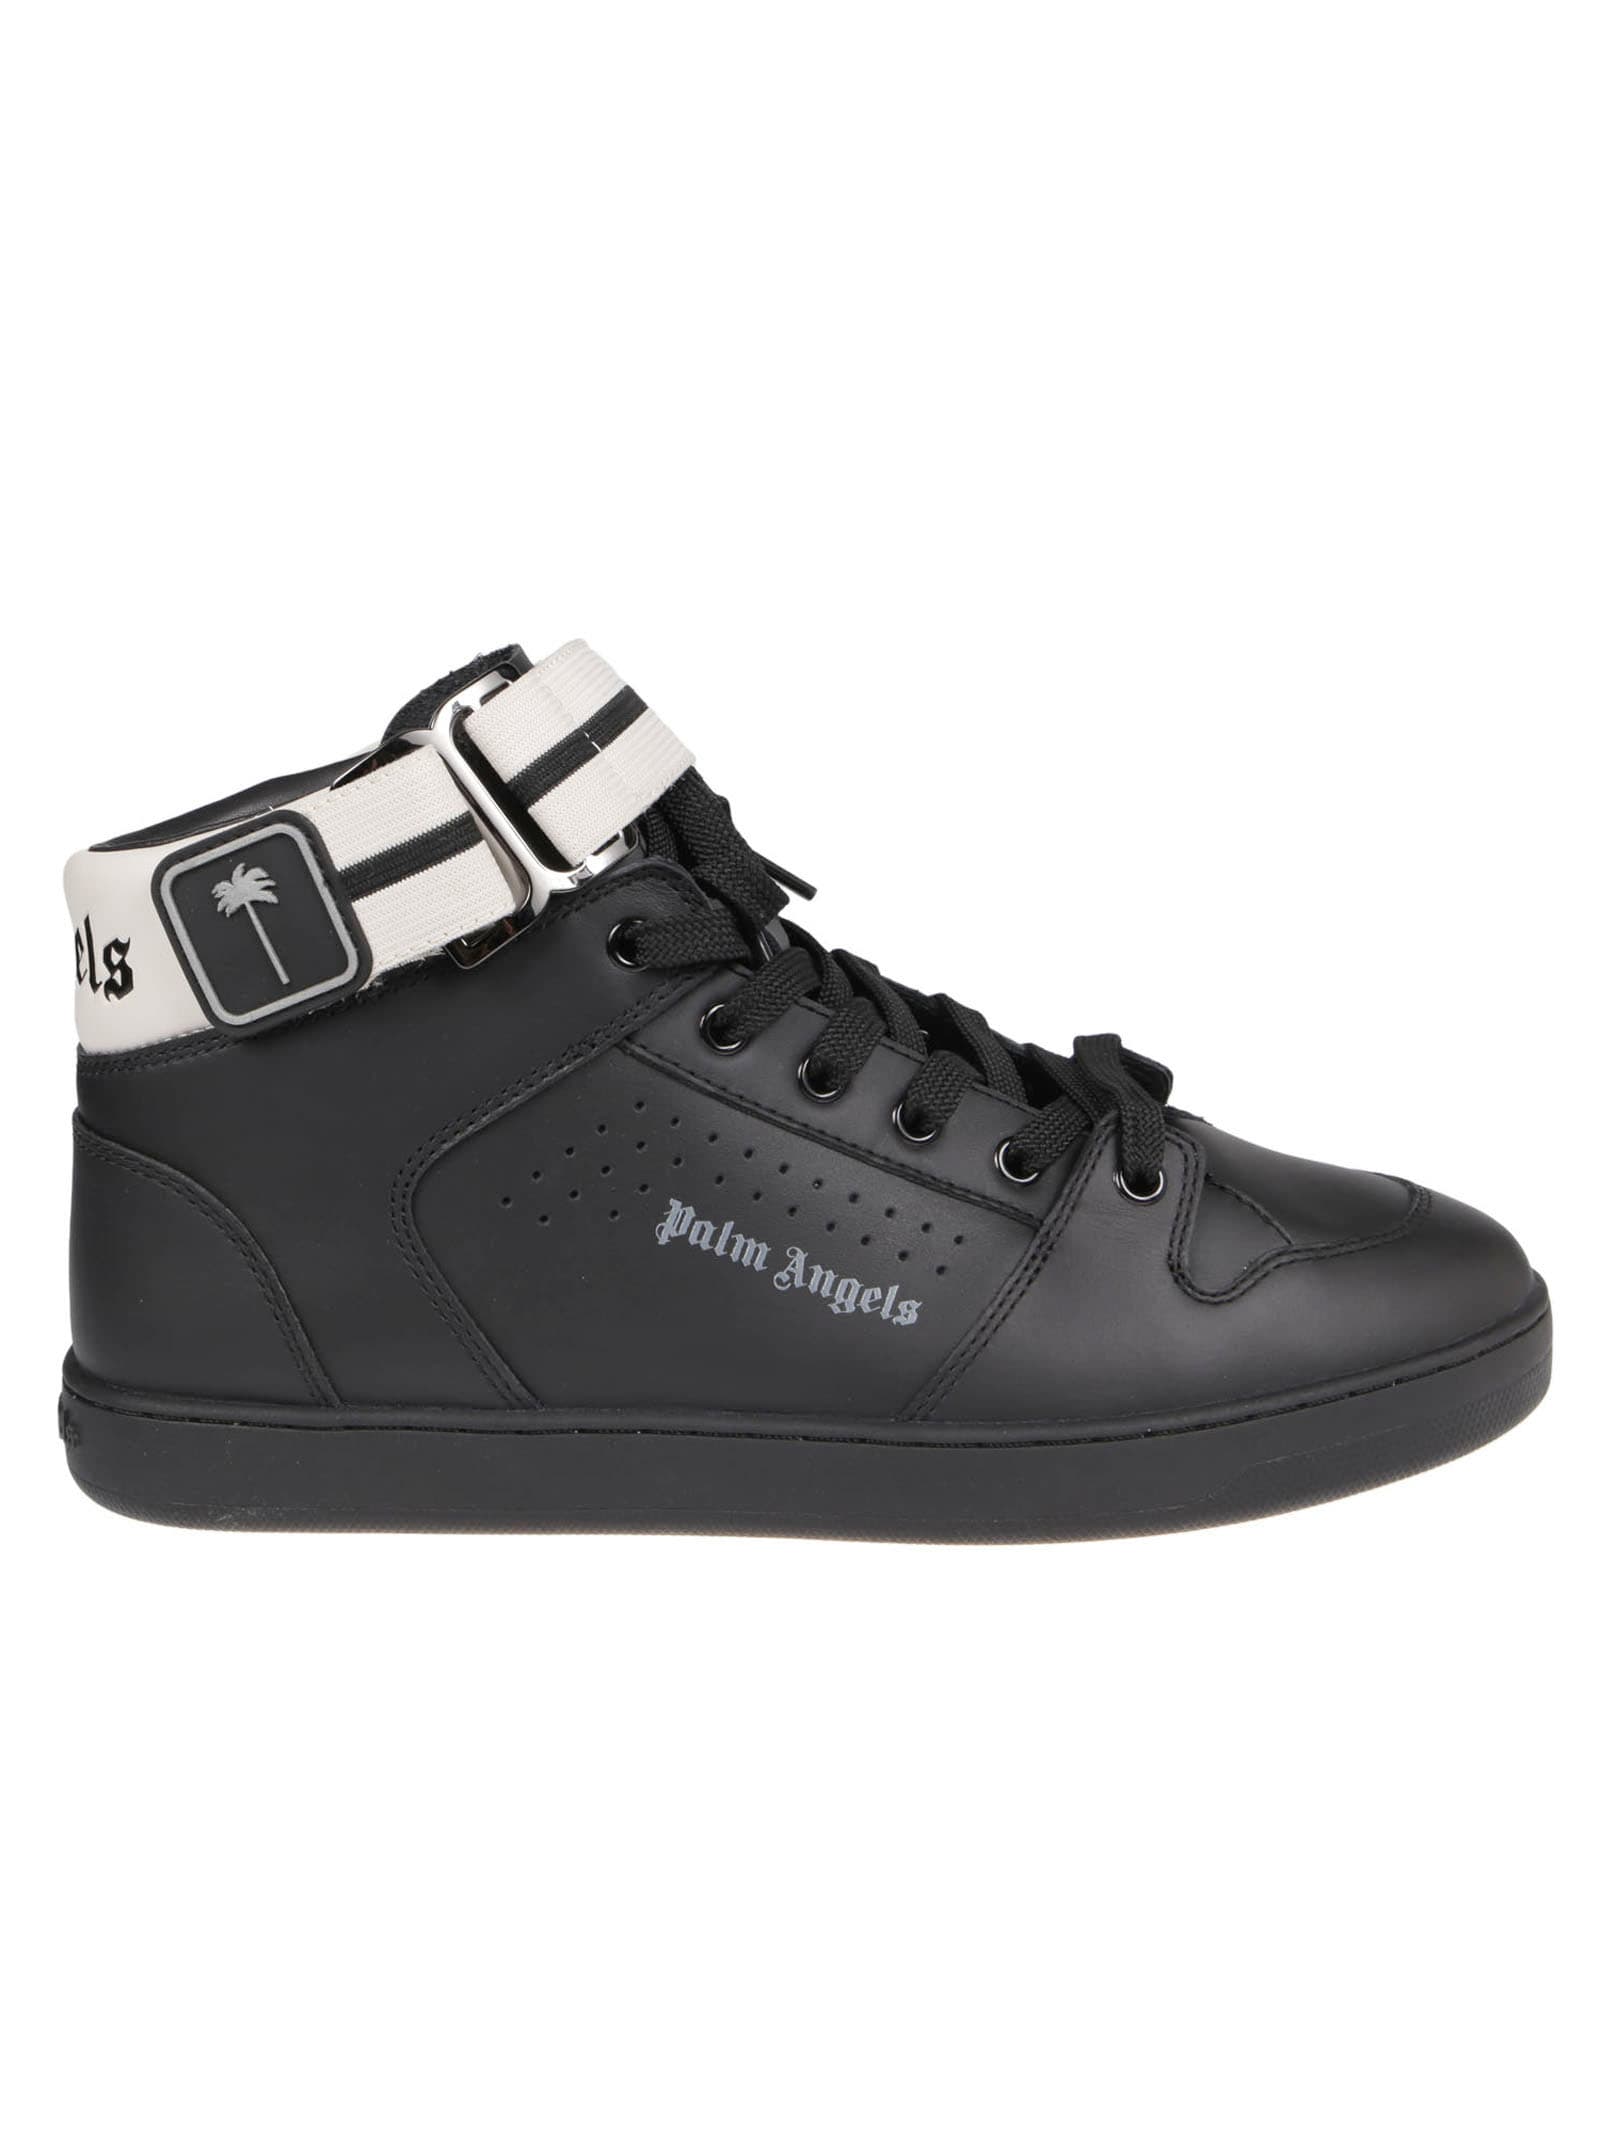 Palm Angels Palm 1 Hightop Sneakers